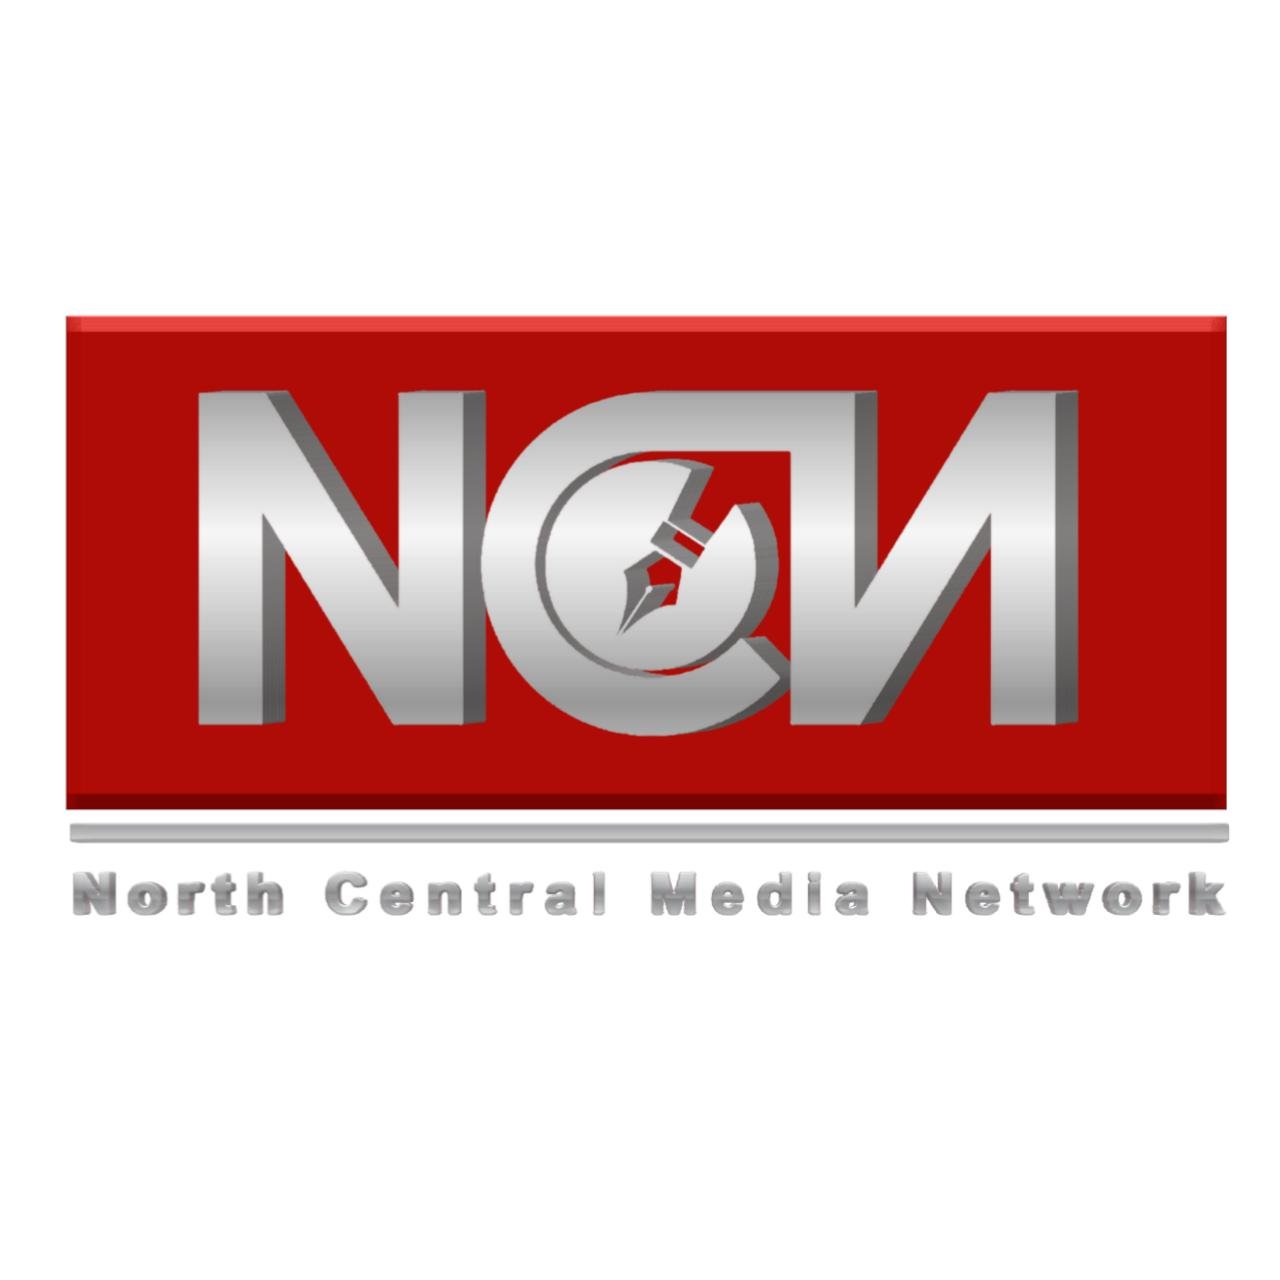 We are the North Central Media